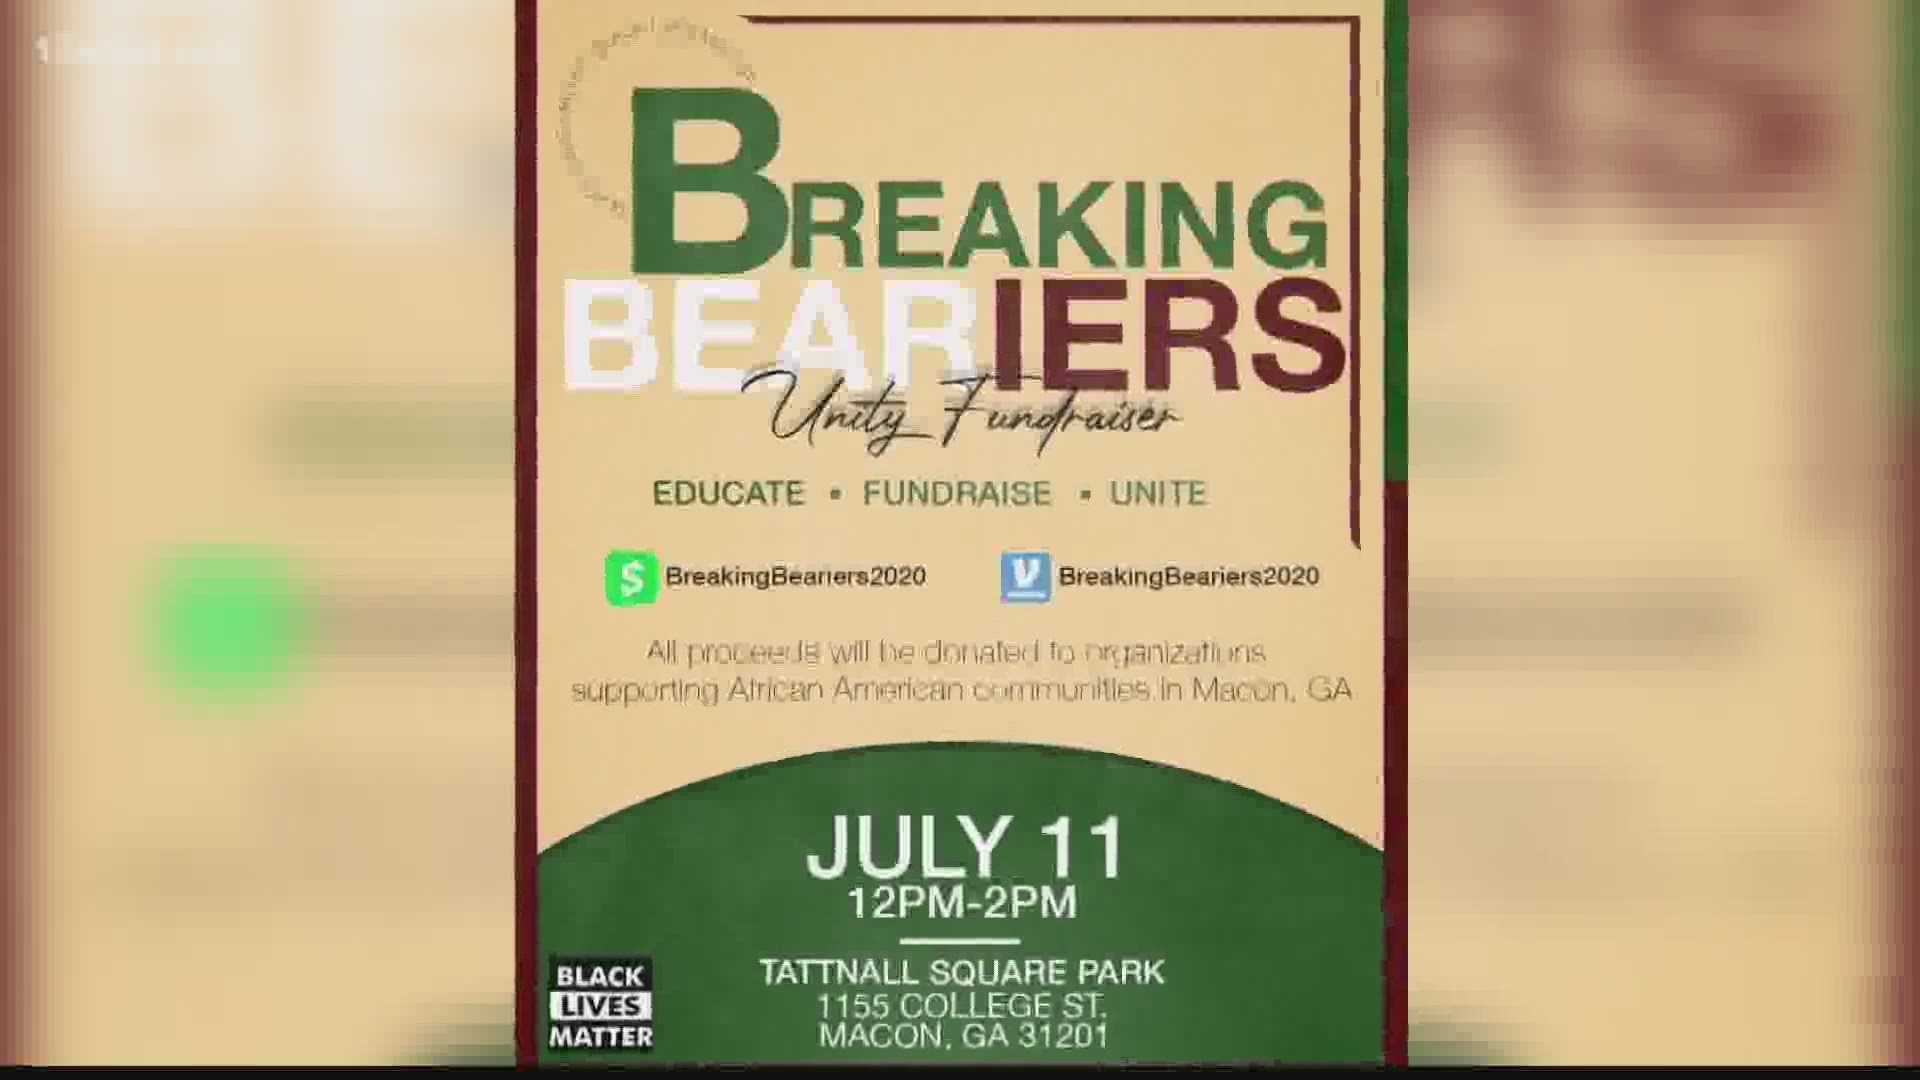 Former Mercer football players are making their voices heard and looking to create a dialogue this weekend with a rally called "Breaking Beariers."